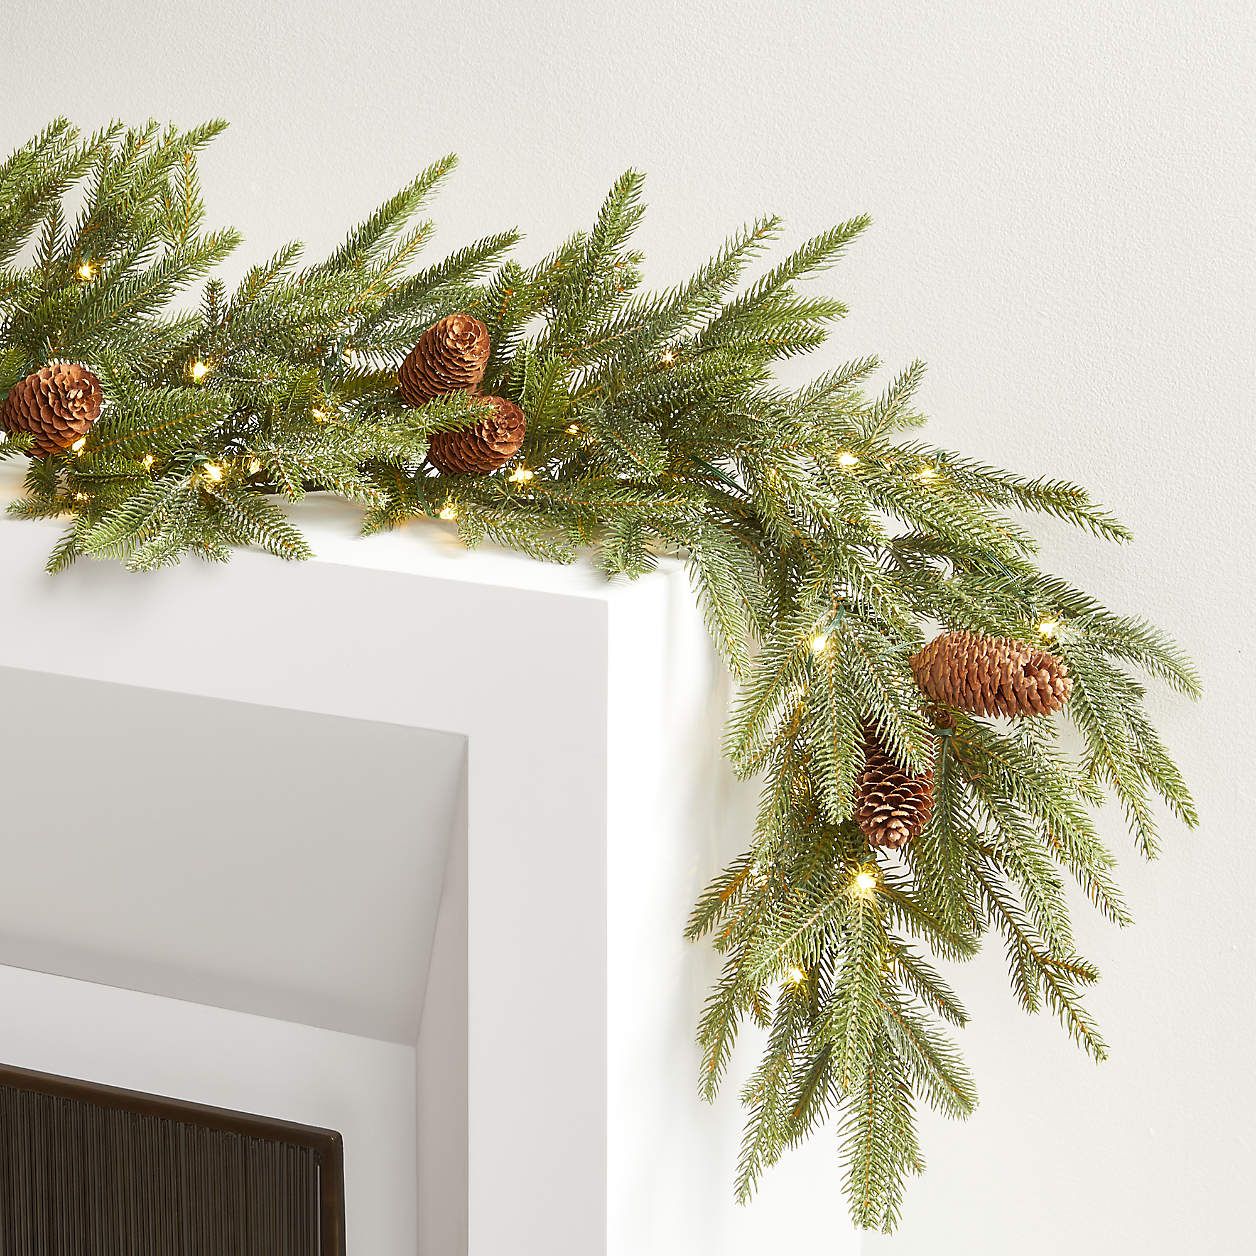 Faux Norway Spruce Pre-Lit LED Garland 6' + Reviews | Crate & Barrel | Crate & Barrel